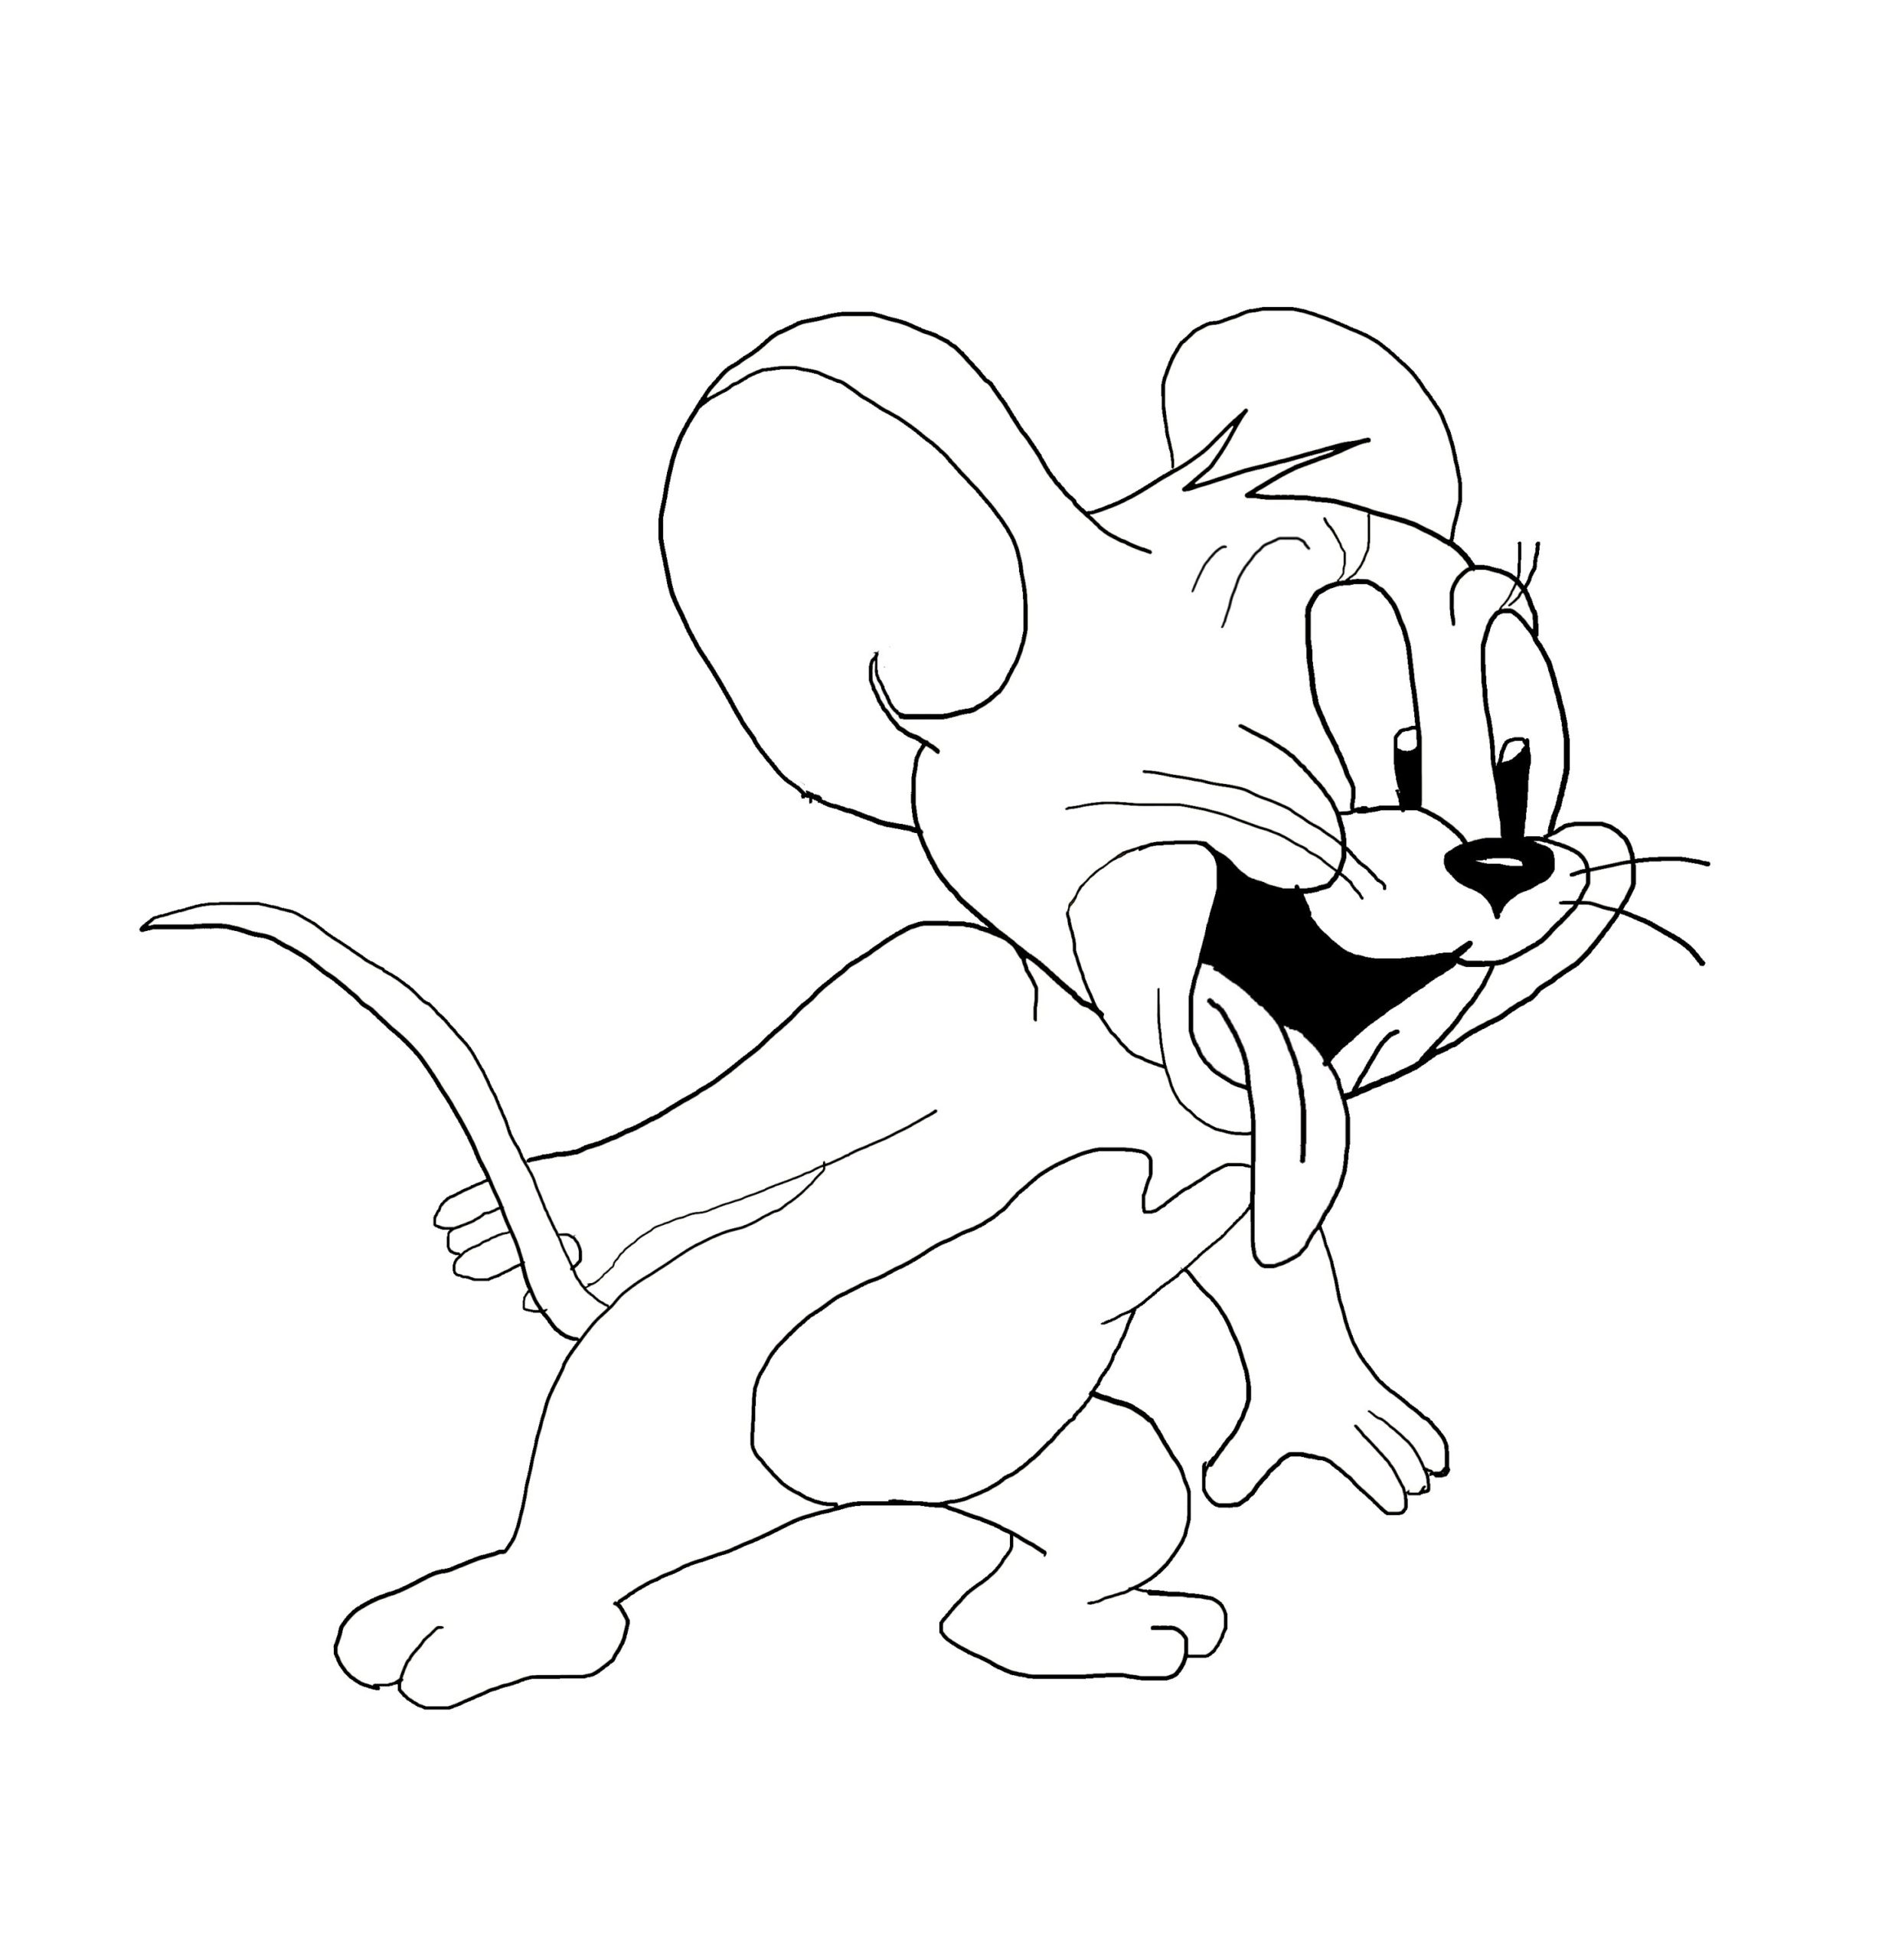 easy sketches of cartoon characters - Clip Art Library